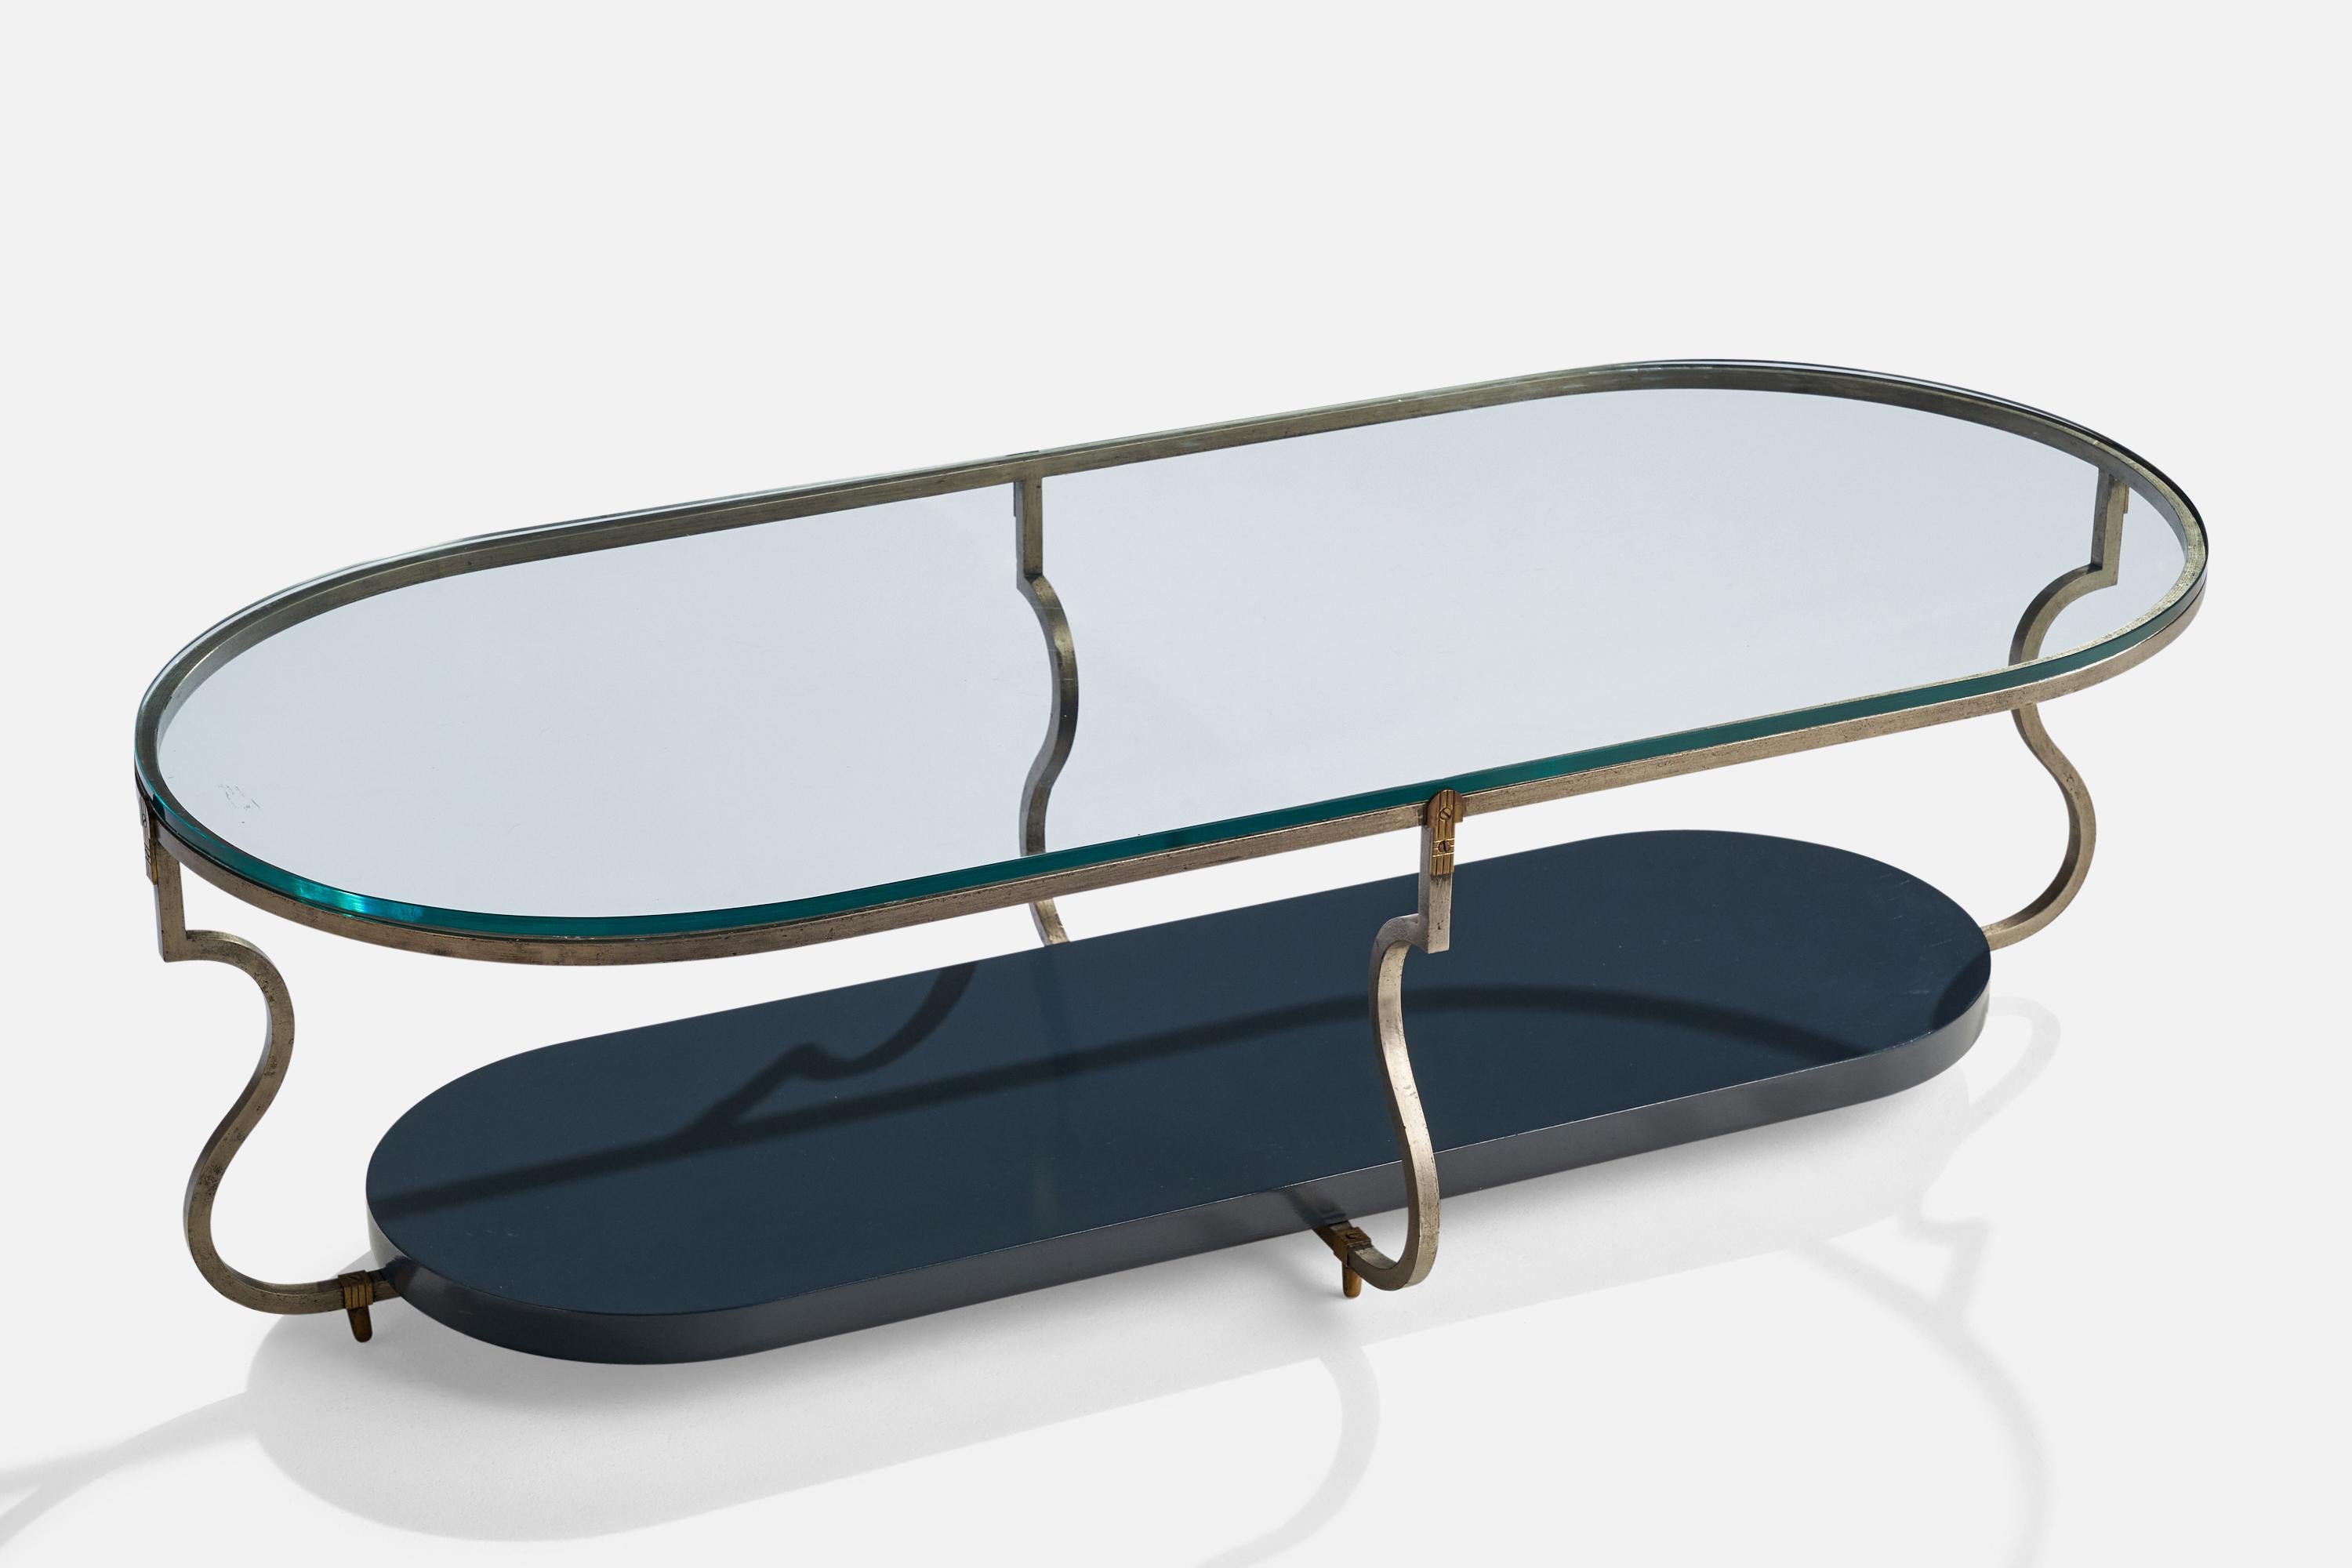 A steel, glass and blue-lacquered wood coffee table designed by Tommi Parzinger and produced by Parzinger Originals, USA, 1950s.